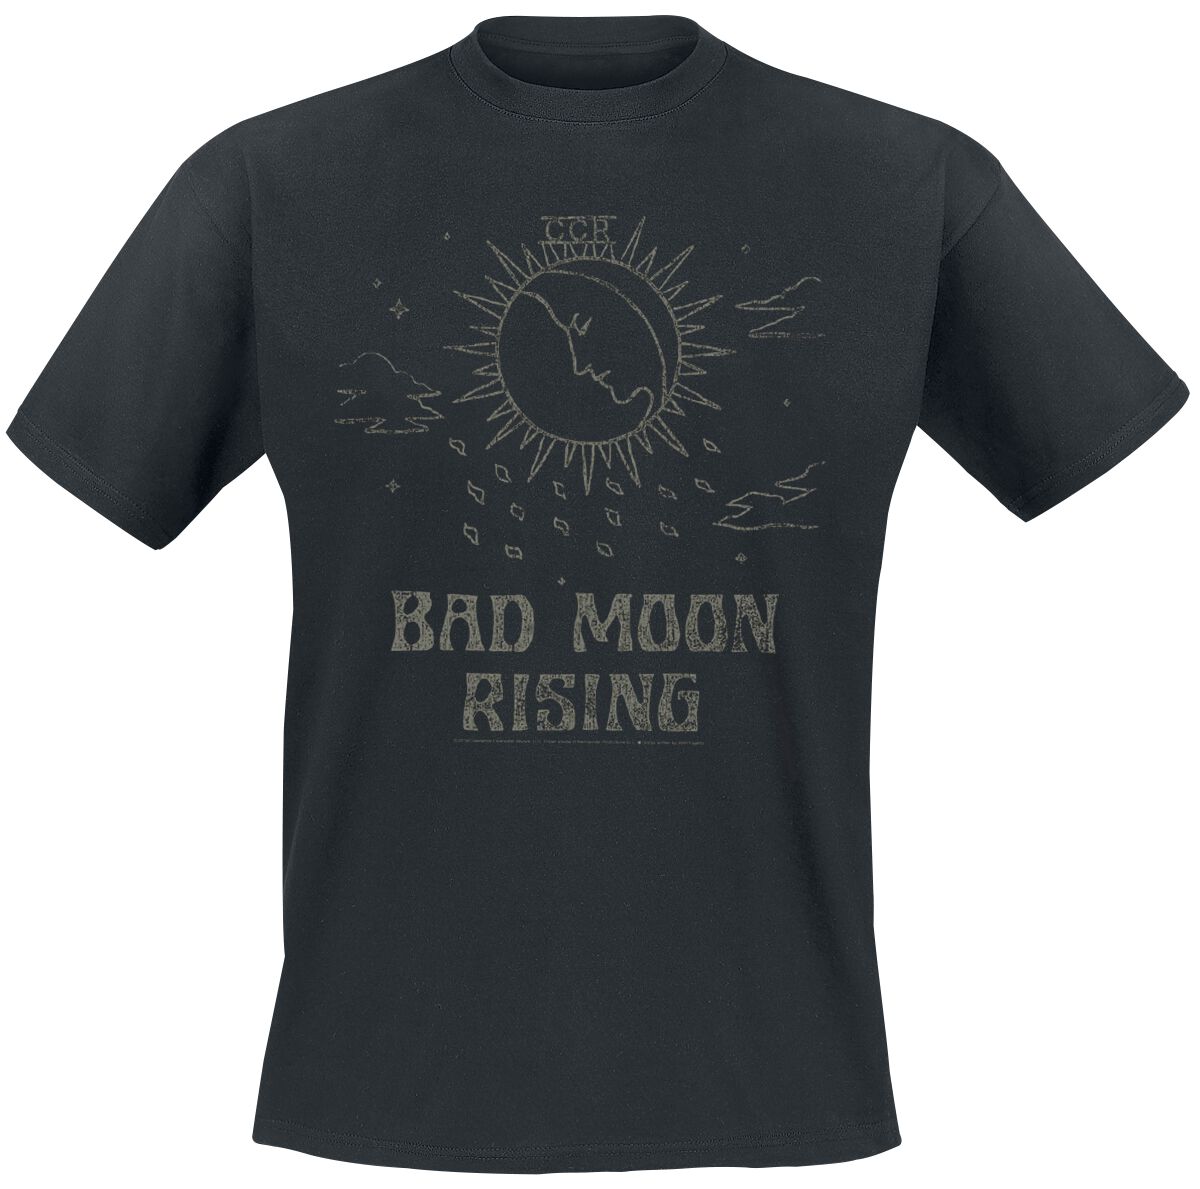 Creedence Clearwater Revival (CCR) Bad Moon Rising T-Shirt black